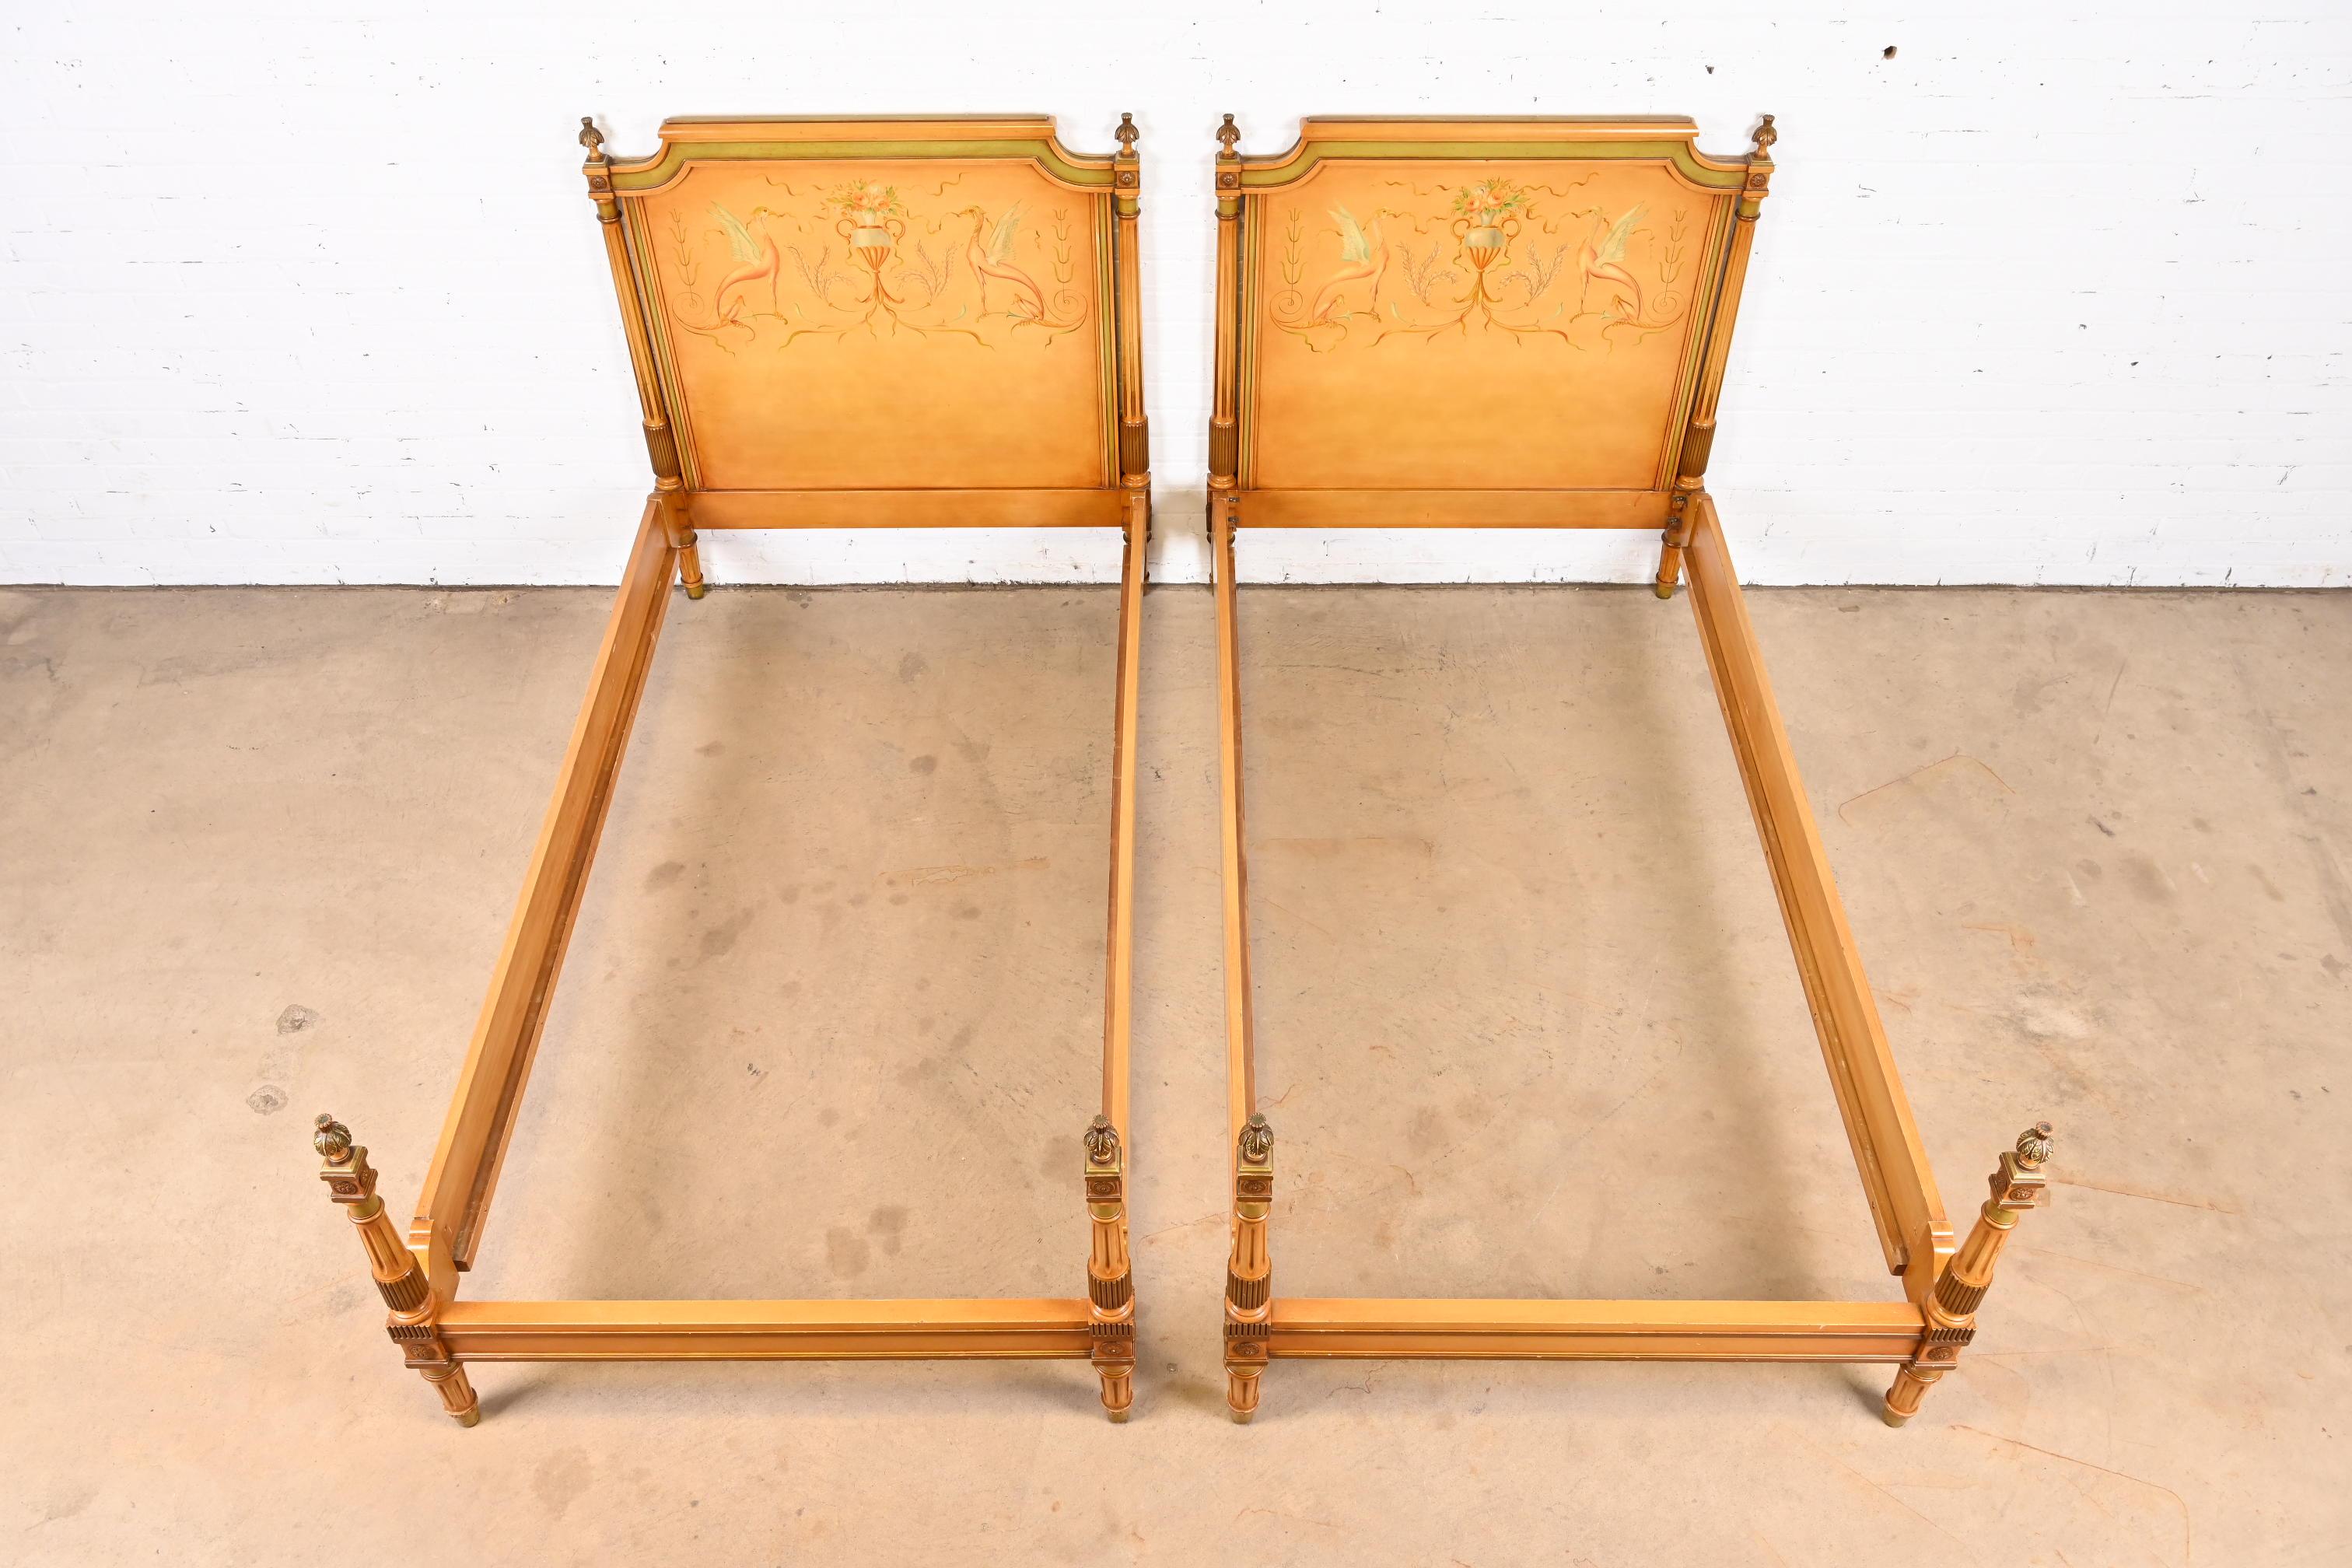 American Neoclassical Painted Parcel-Gilt Twin Size Beds in the Manner of Grosfeld House